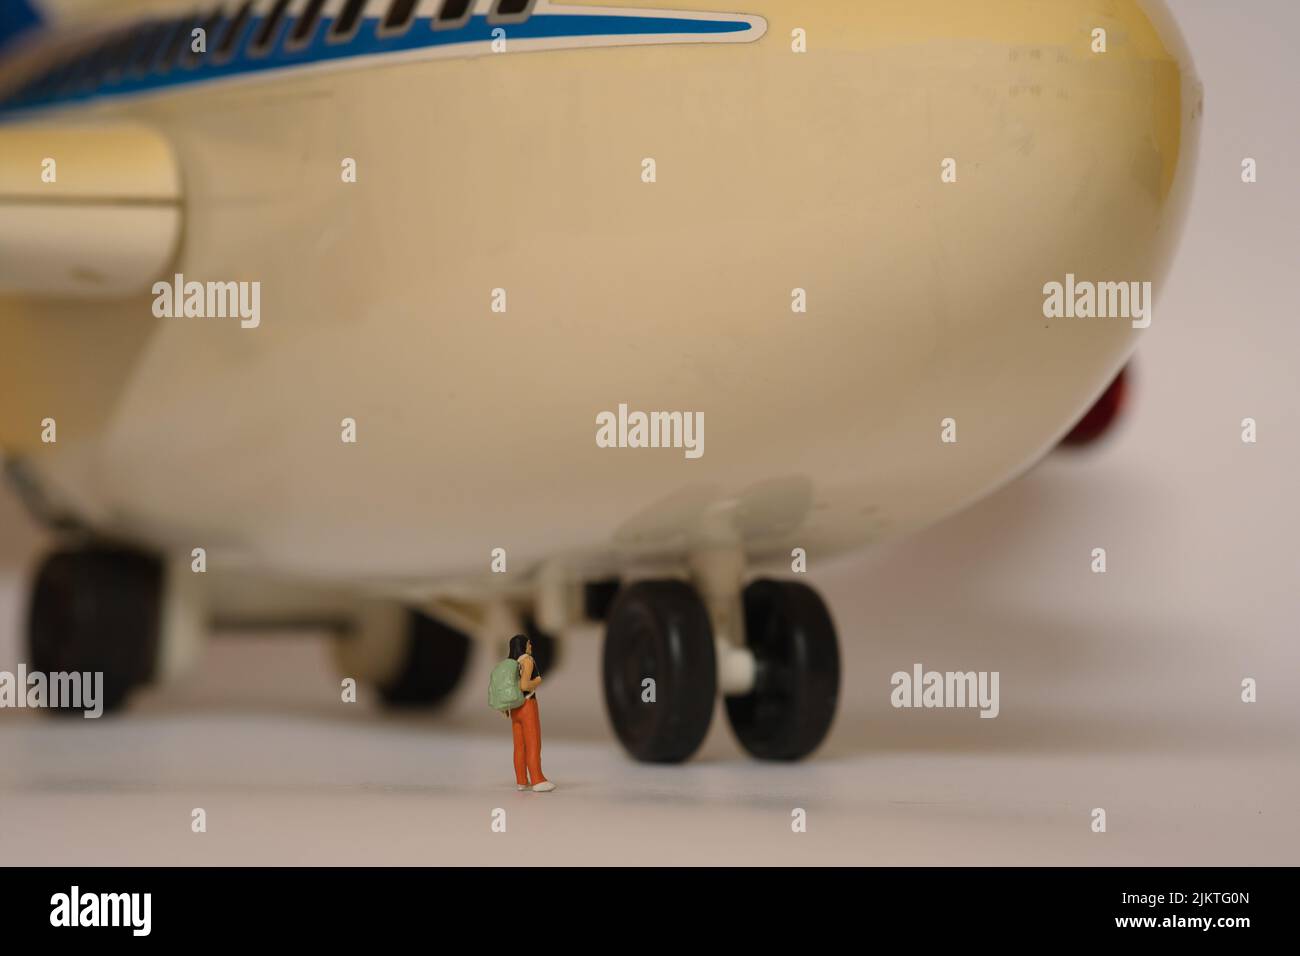 a huge airplane , front view where a traveler with a backpack stands in front of the wheels Stock Photo